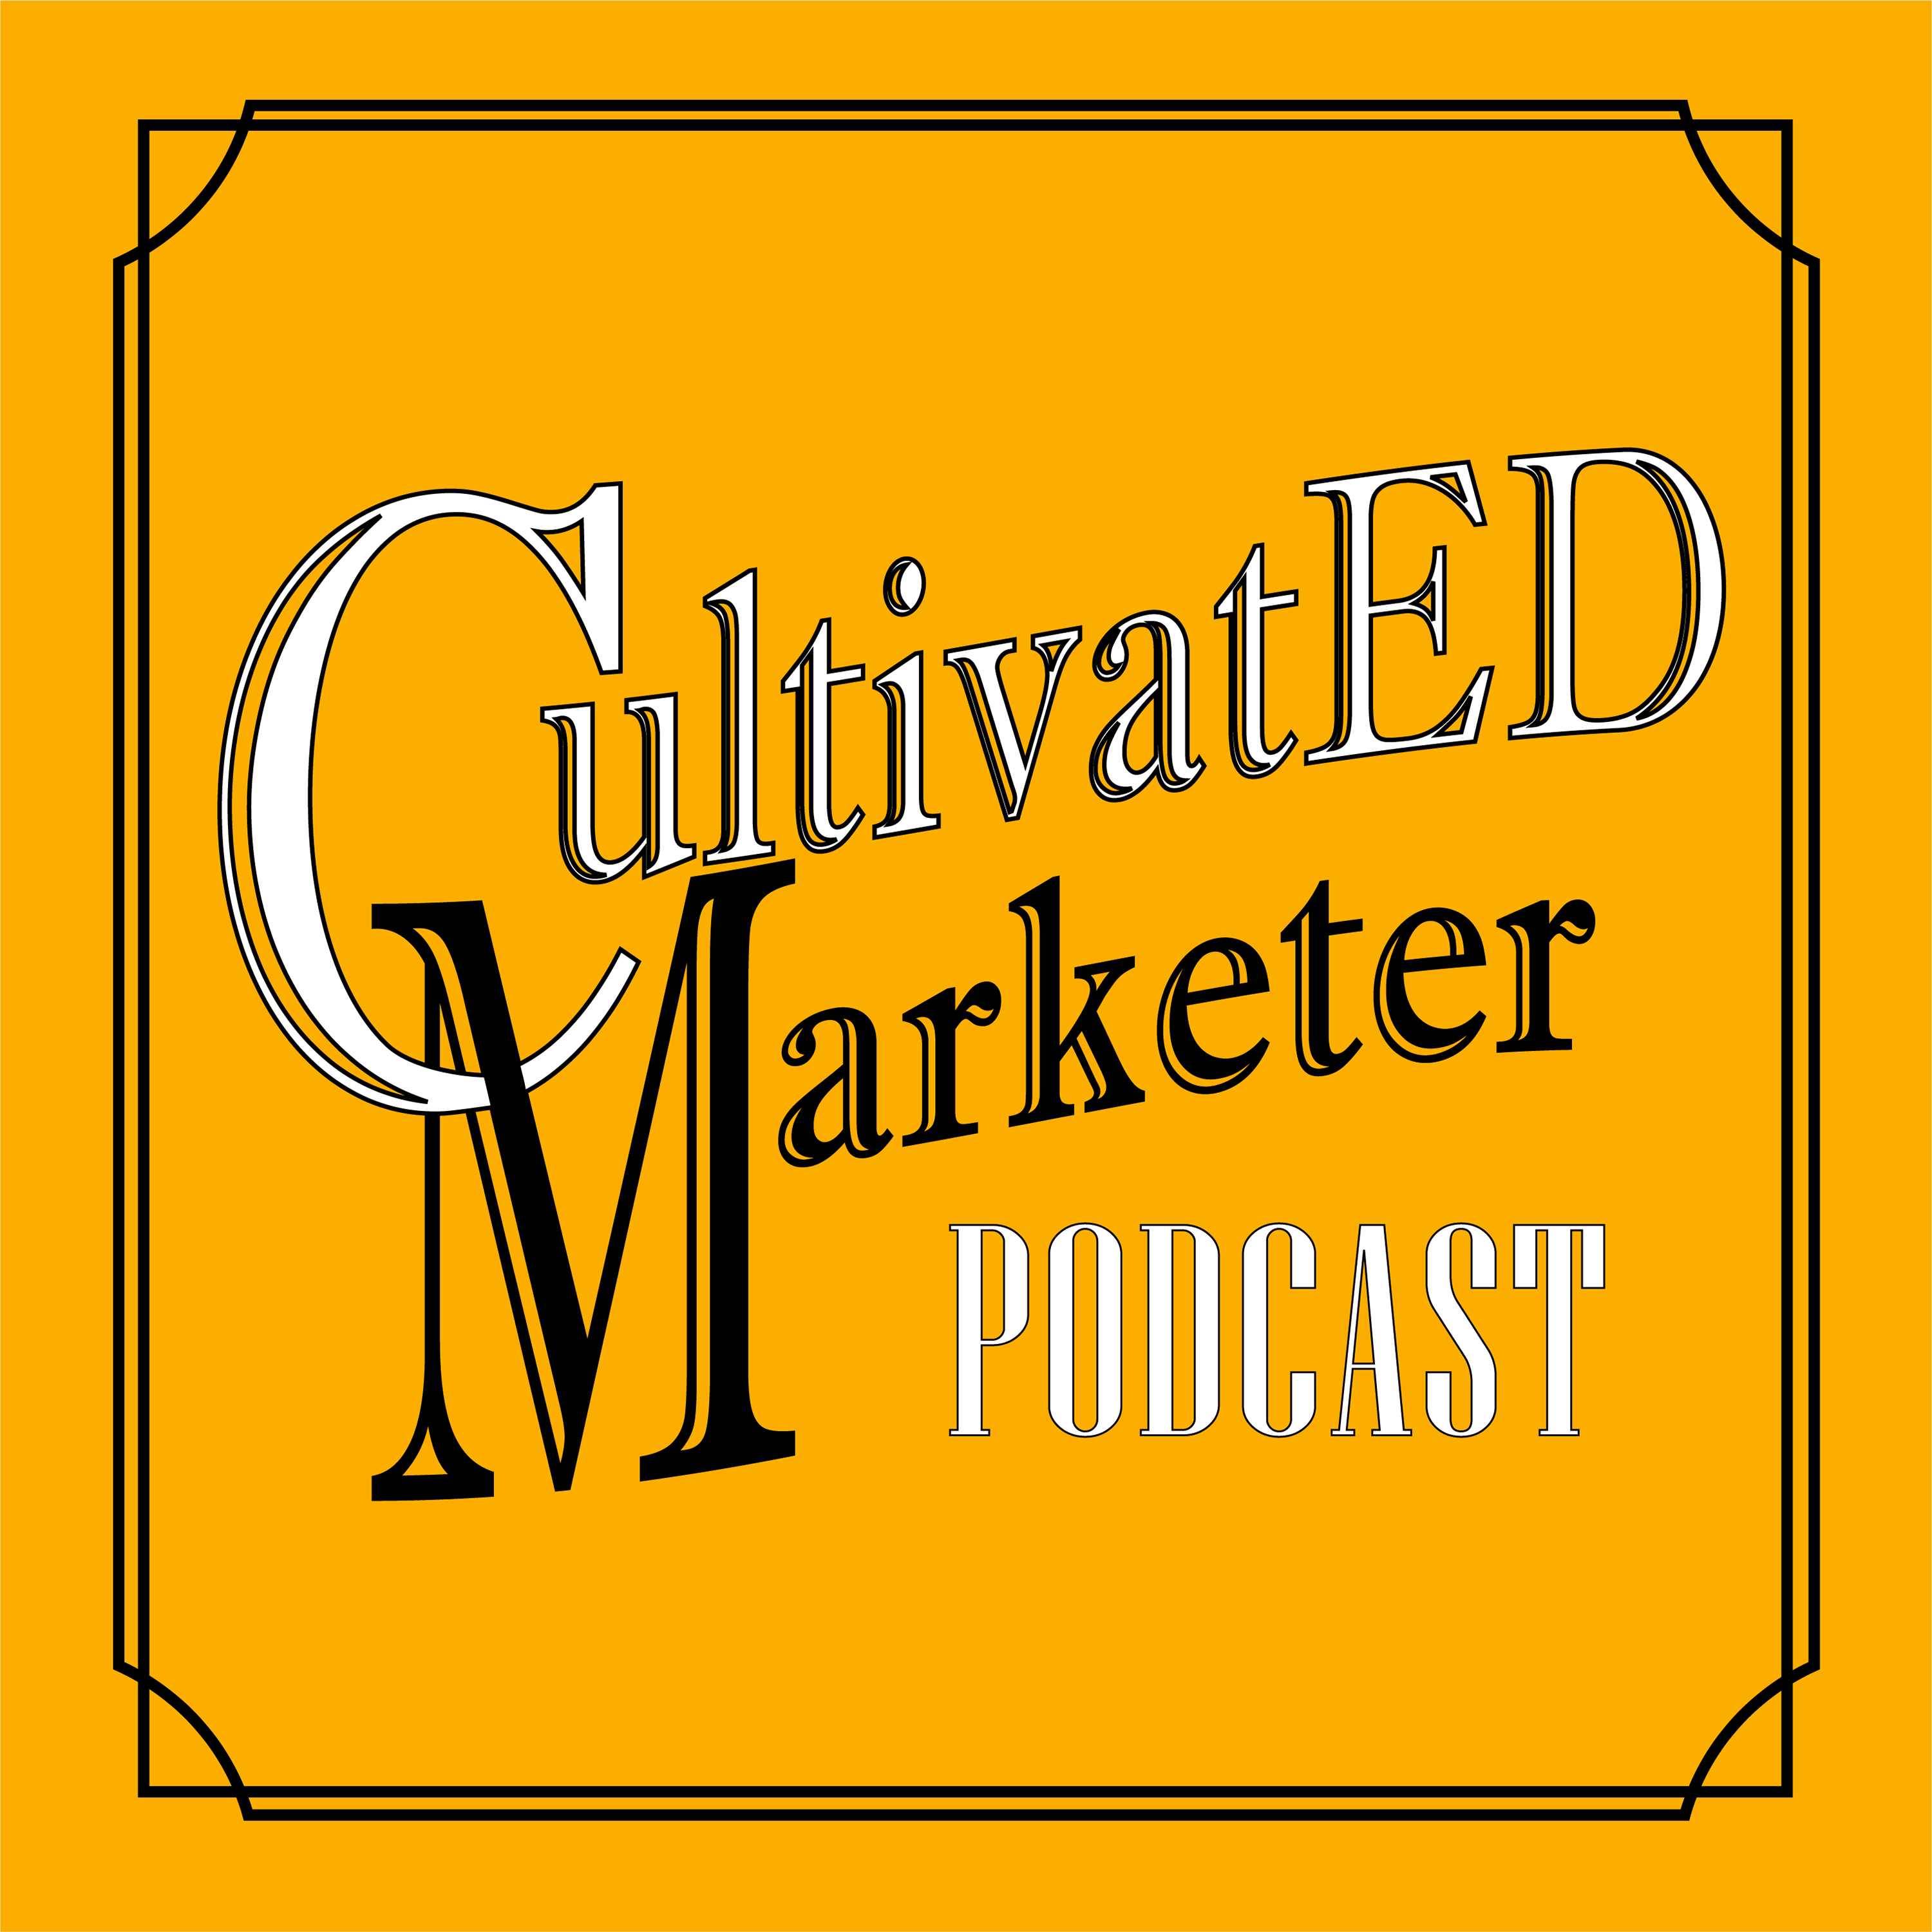 CultivatED Marketer